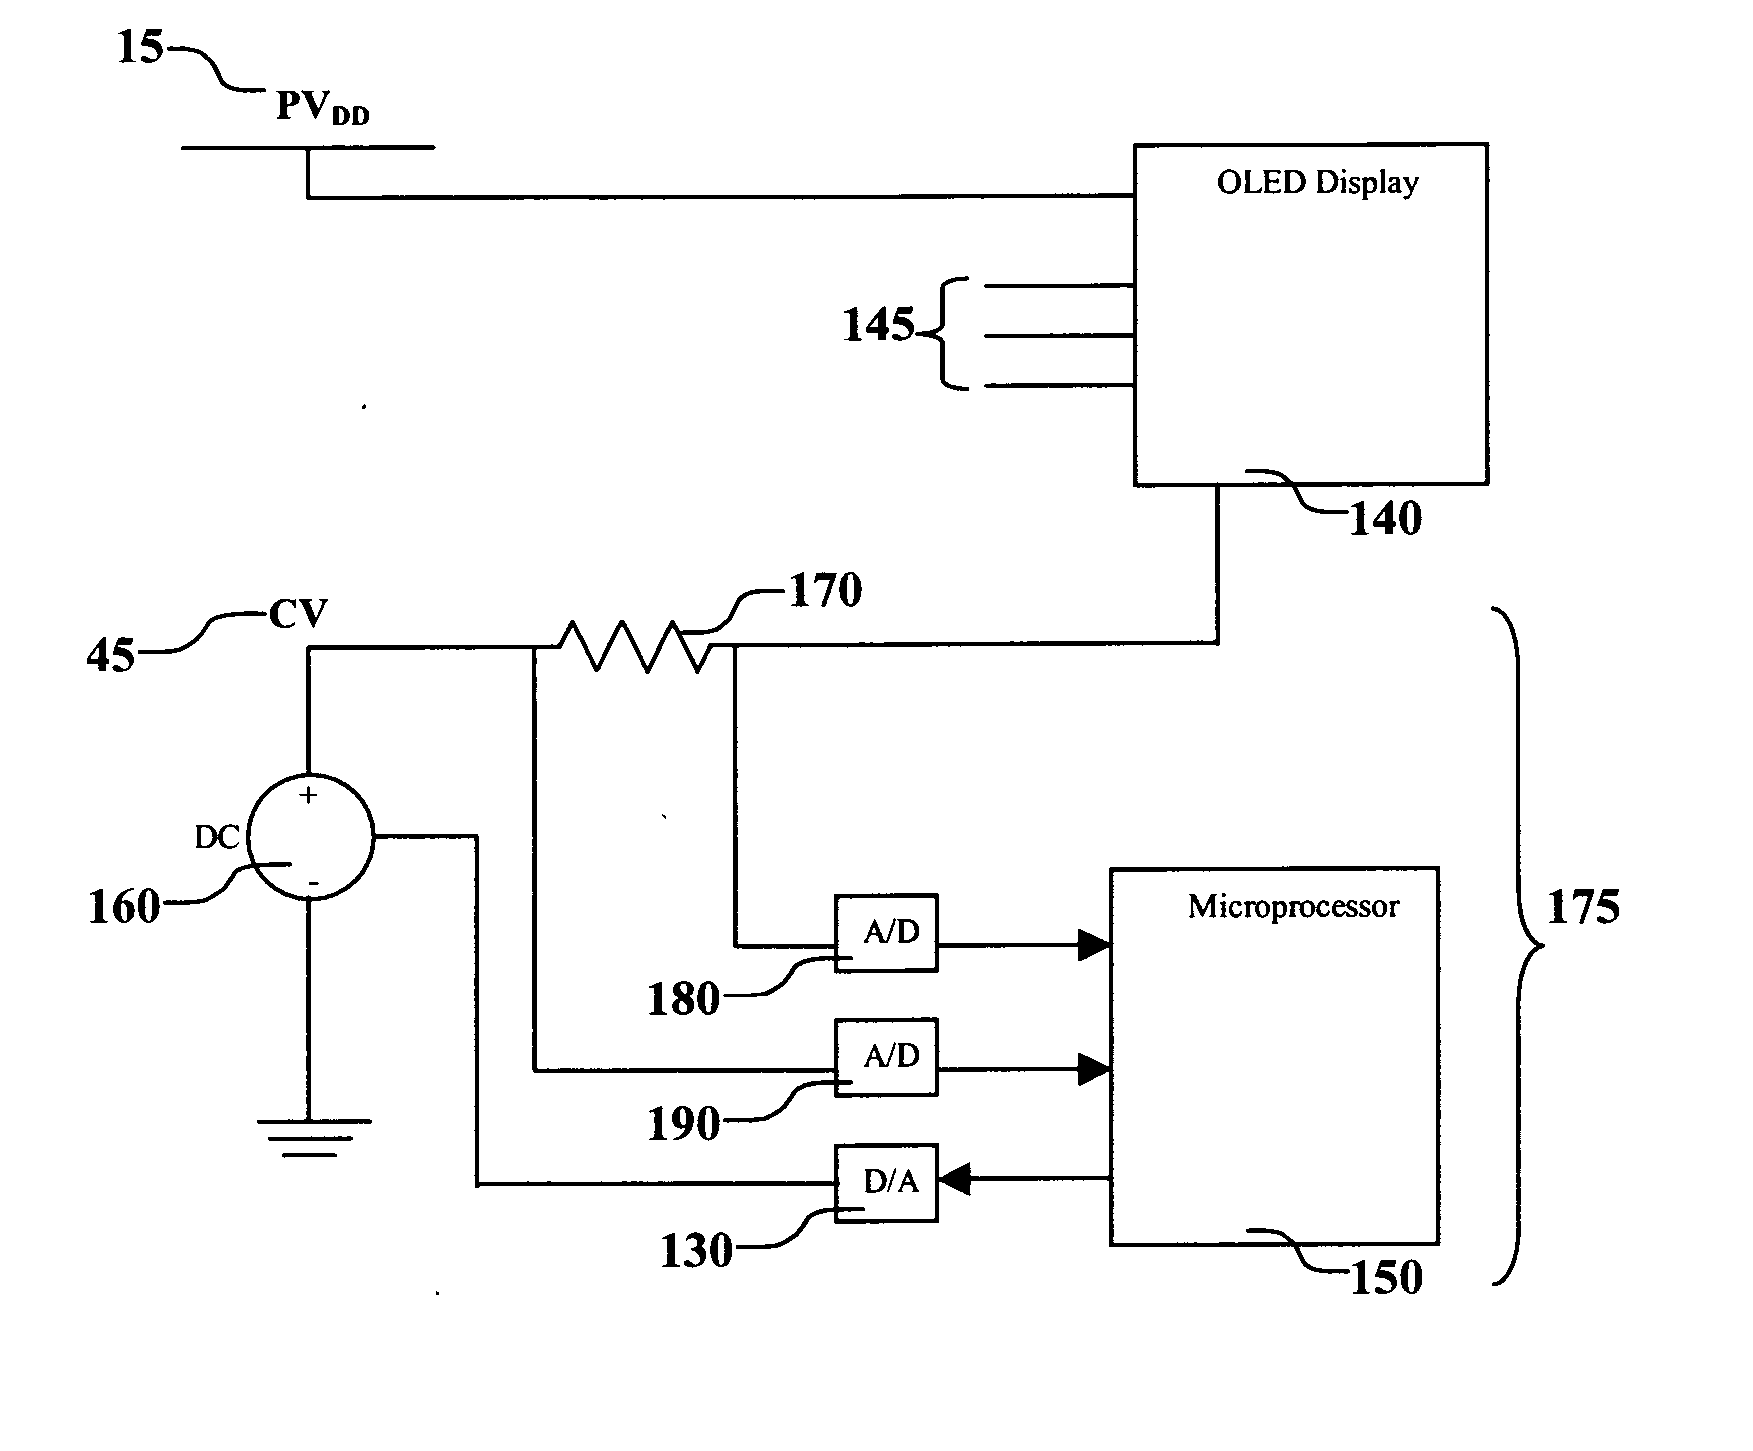 Selecting adjustment for OLED drive voltage